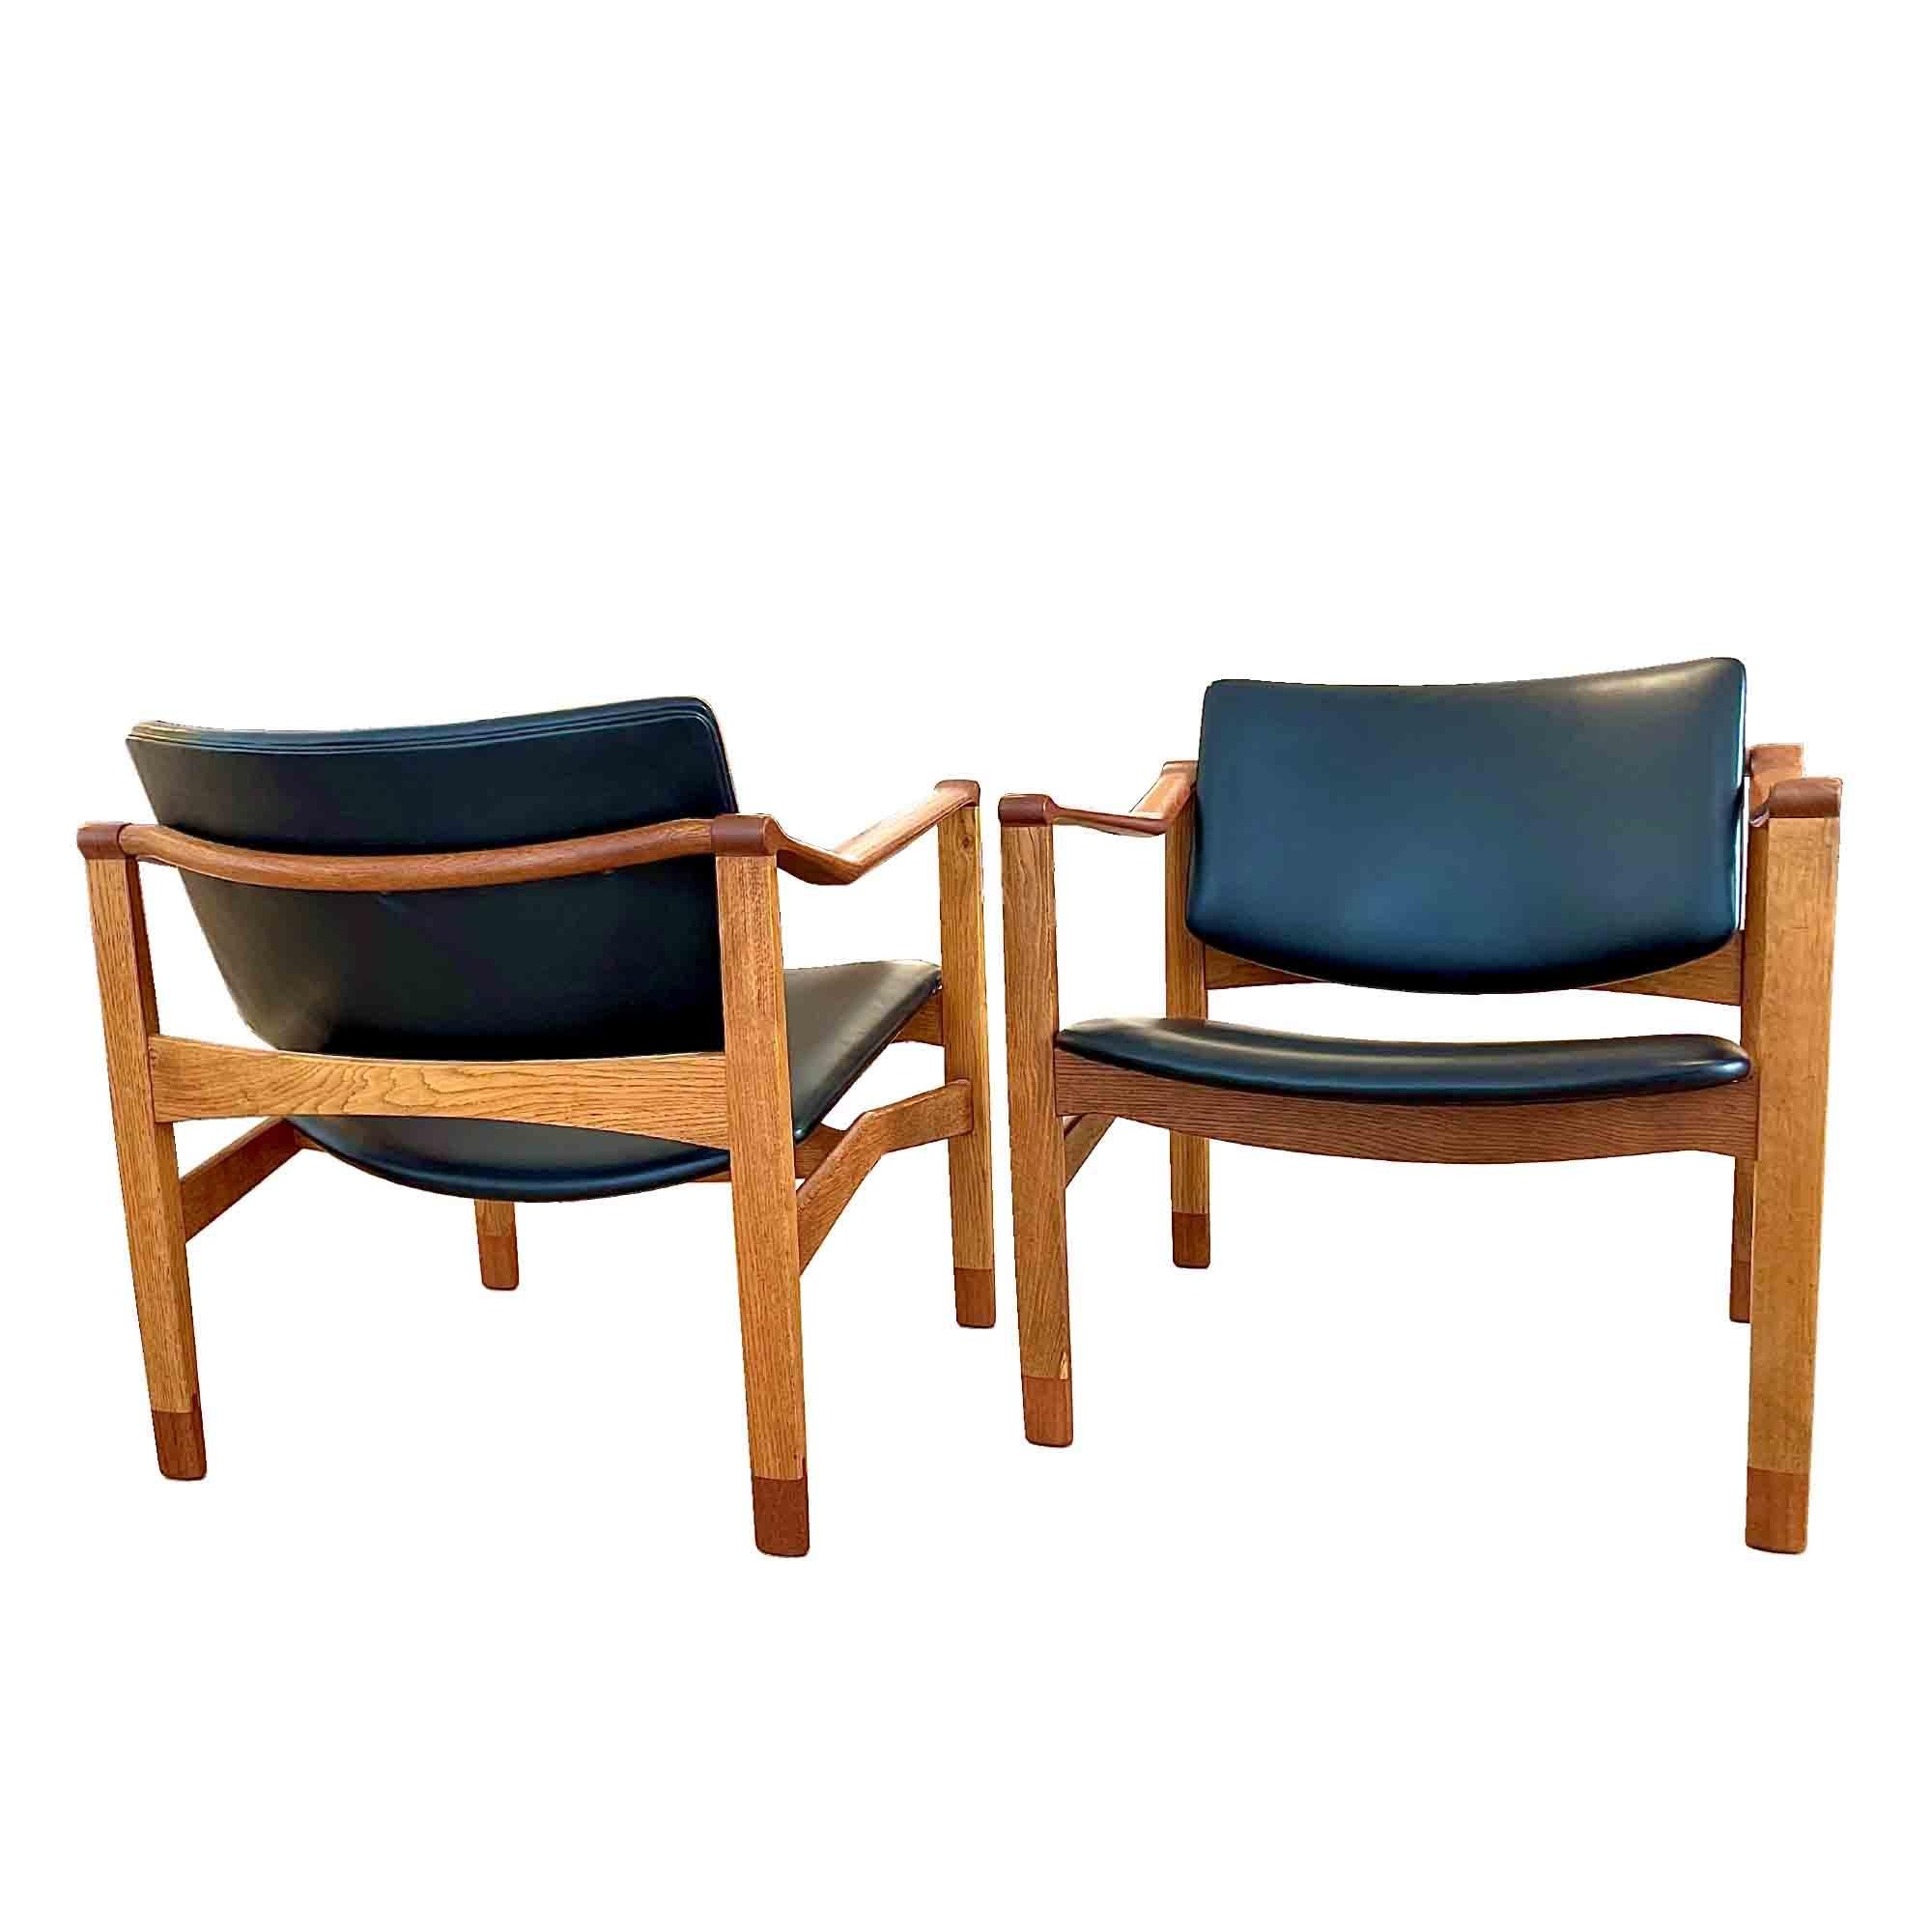 William Watting was an American furniture designer, who, based in Denmark in the 1950s, produced William Watting Furniture for his own company. His creations are characterized by their simplicity, functionality and geometric shapes.
Pair of very